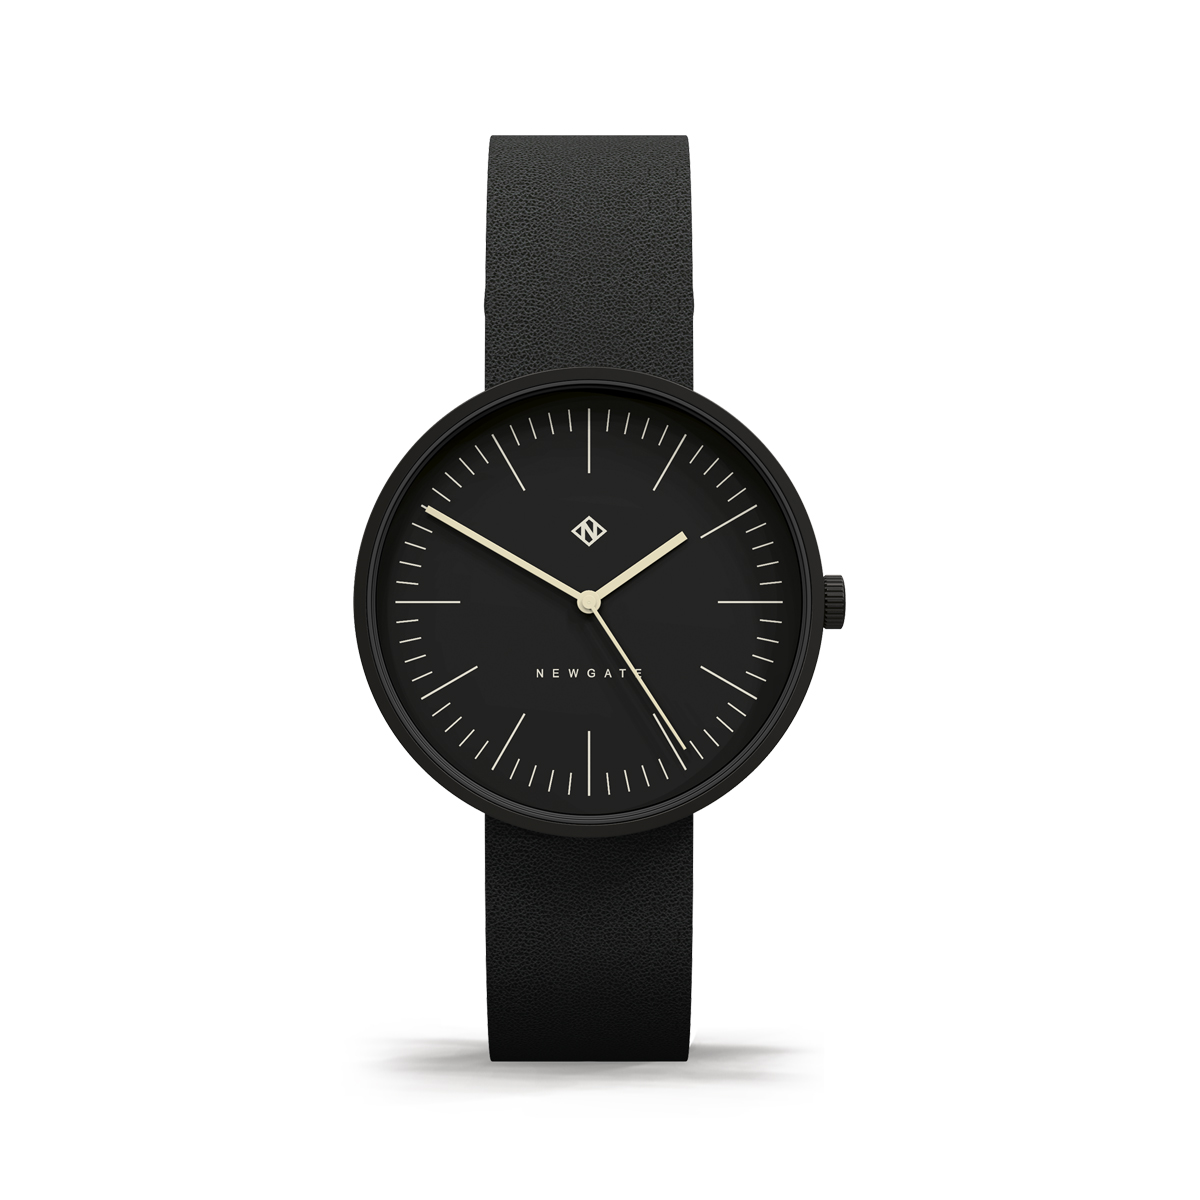 Newgate watches new launch at baselworld 2018 drumline in black with black marker dial and black nubuck leather strap